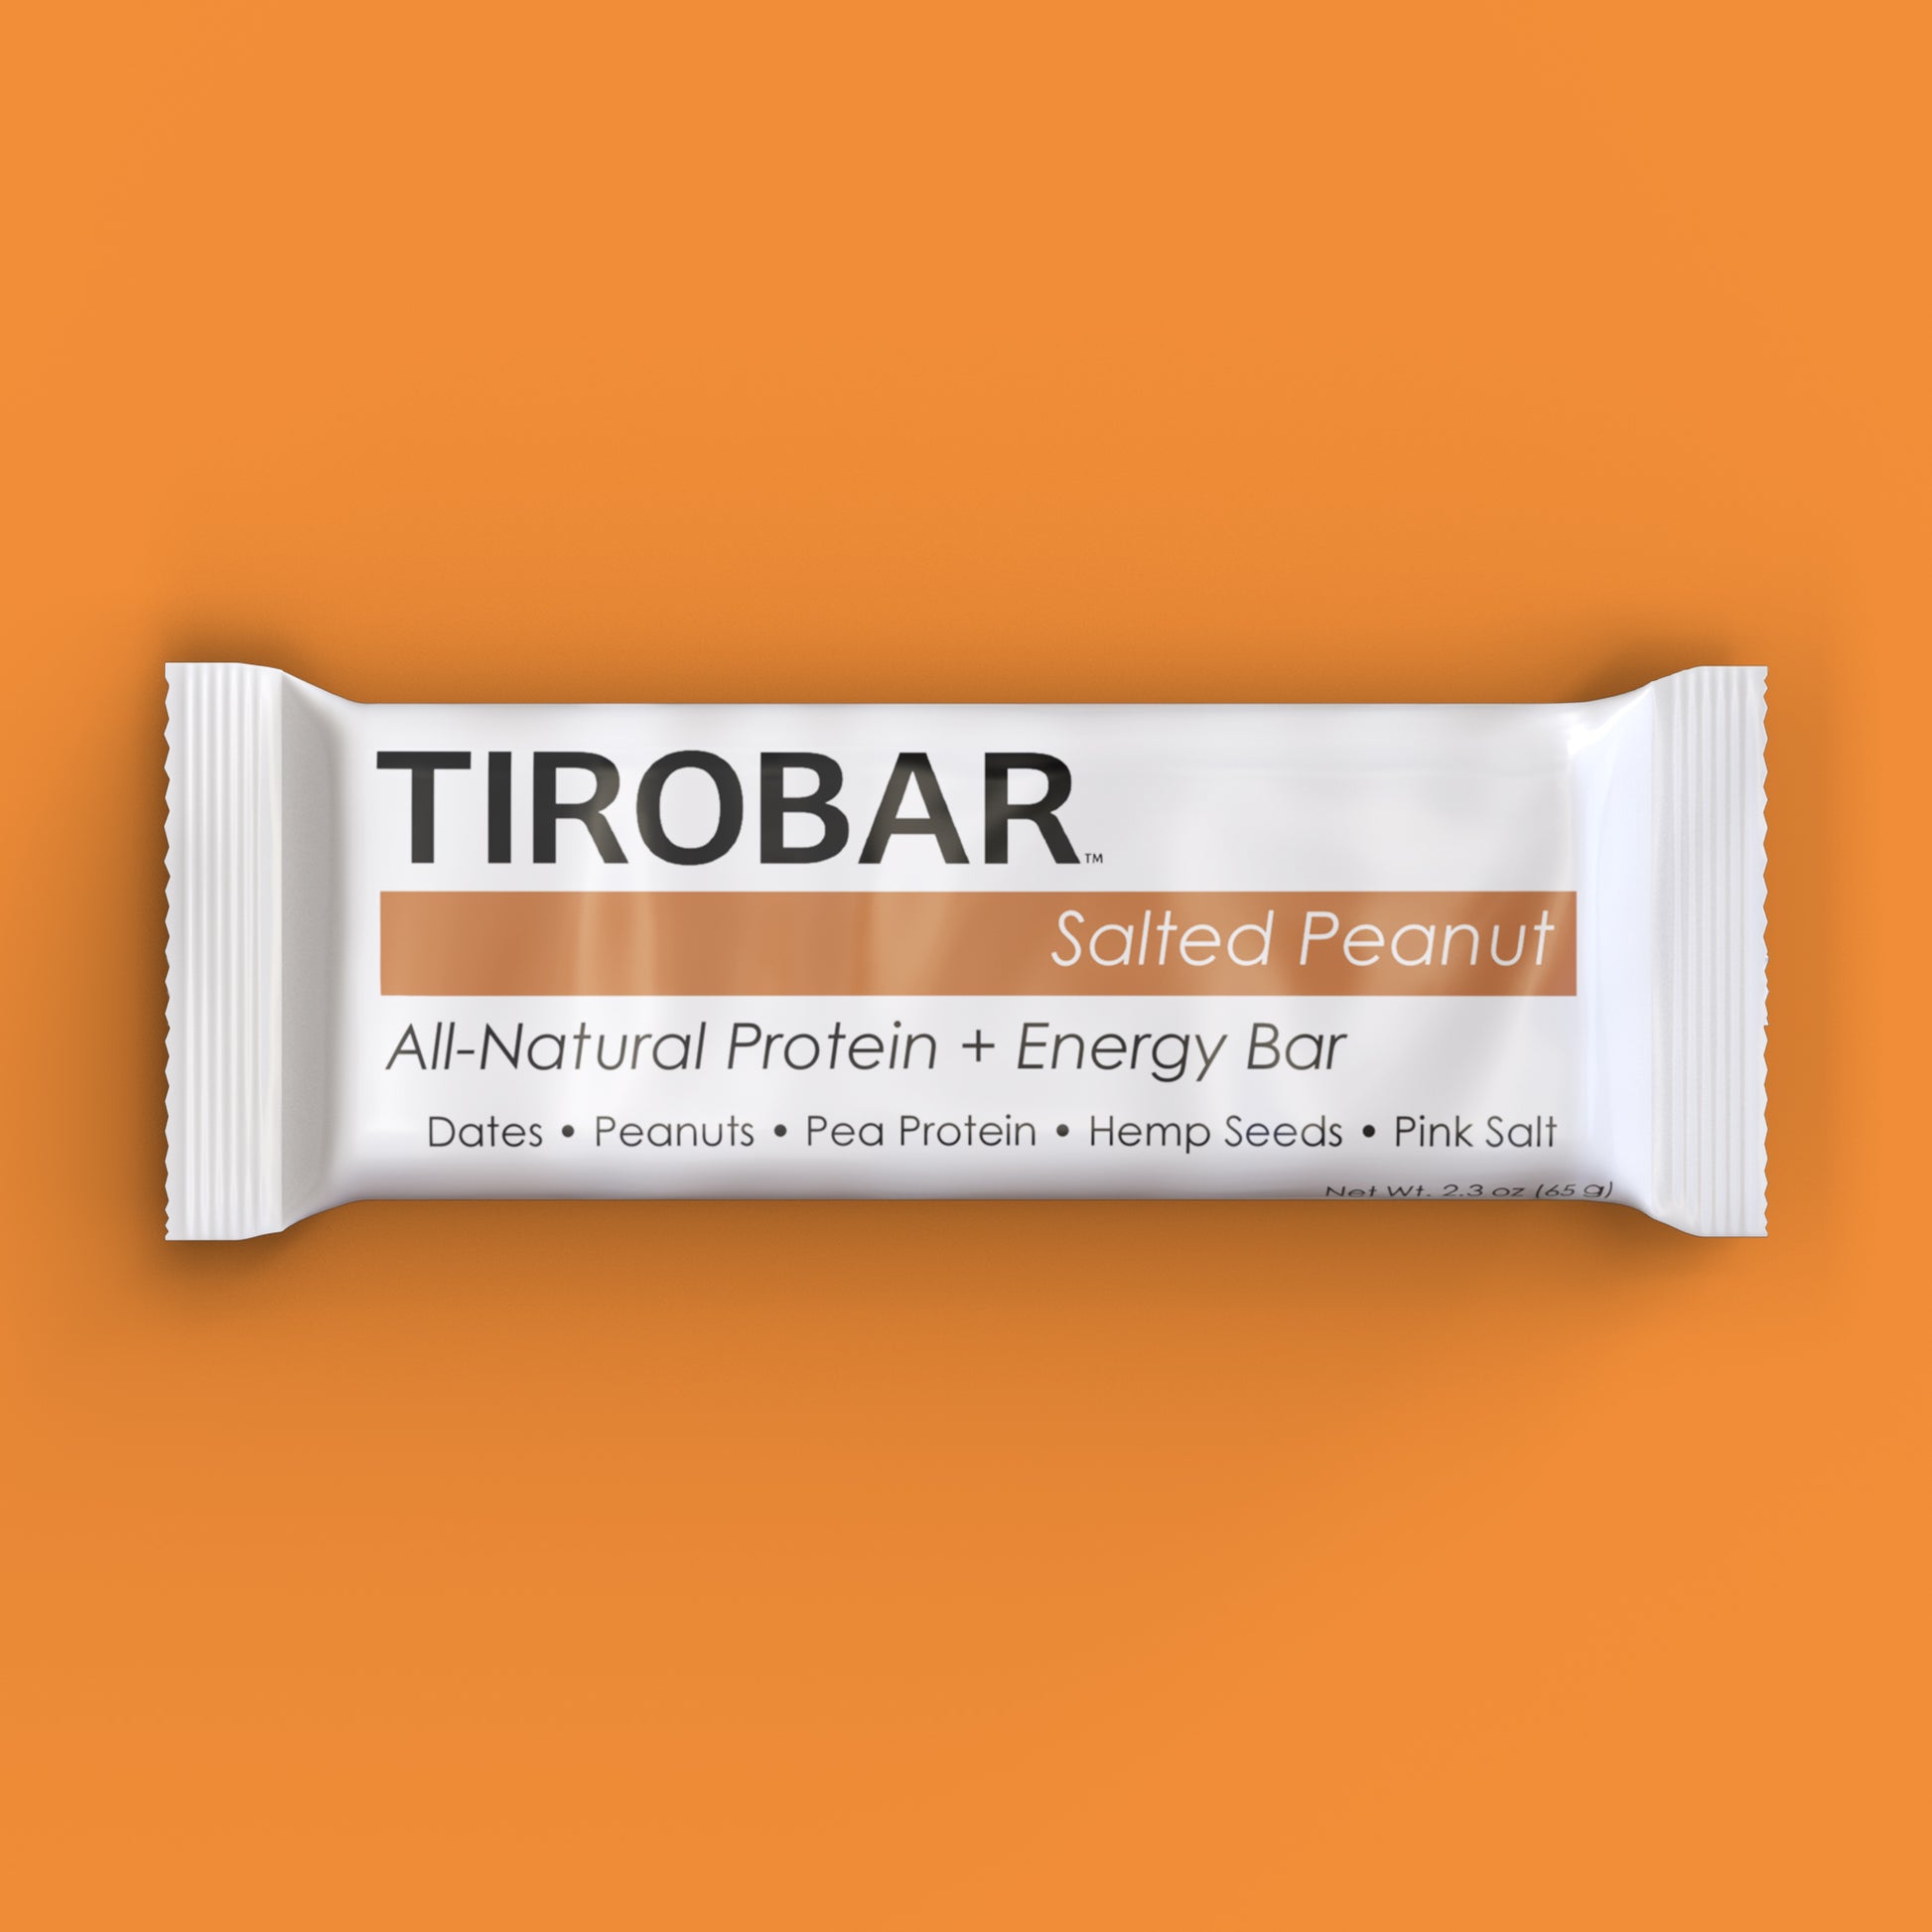 A salted peanut TIROBAR, a vegan and all natural protein bar, sits in a white wrapper against an orange background. The bar is visible from the top.